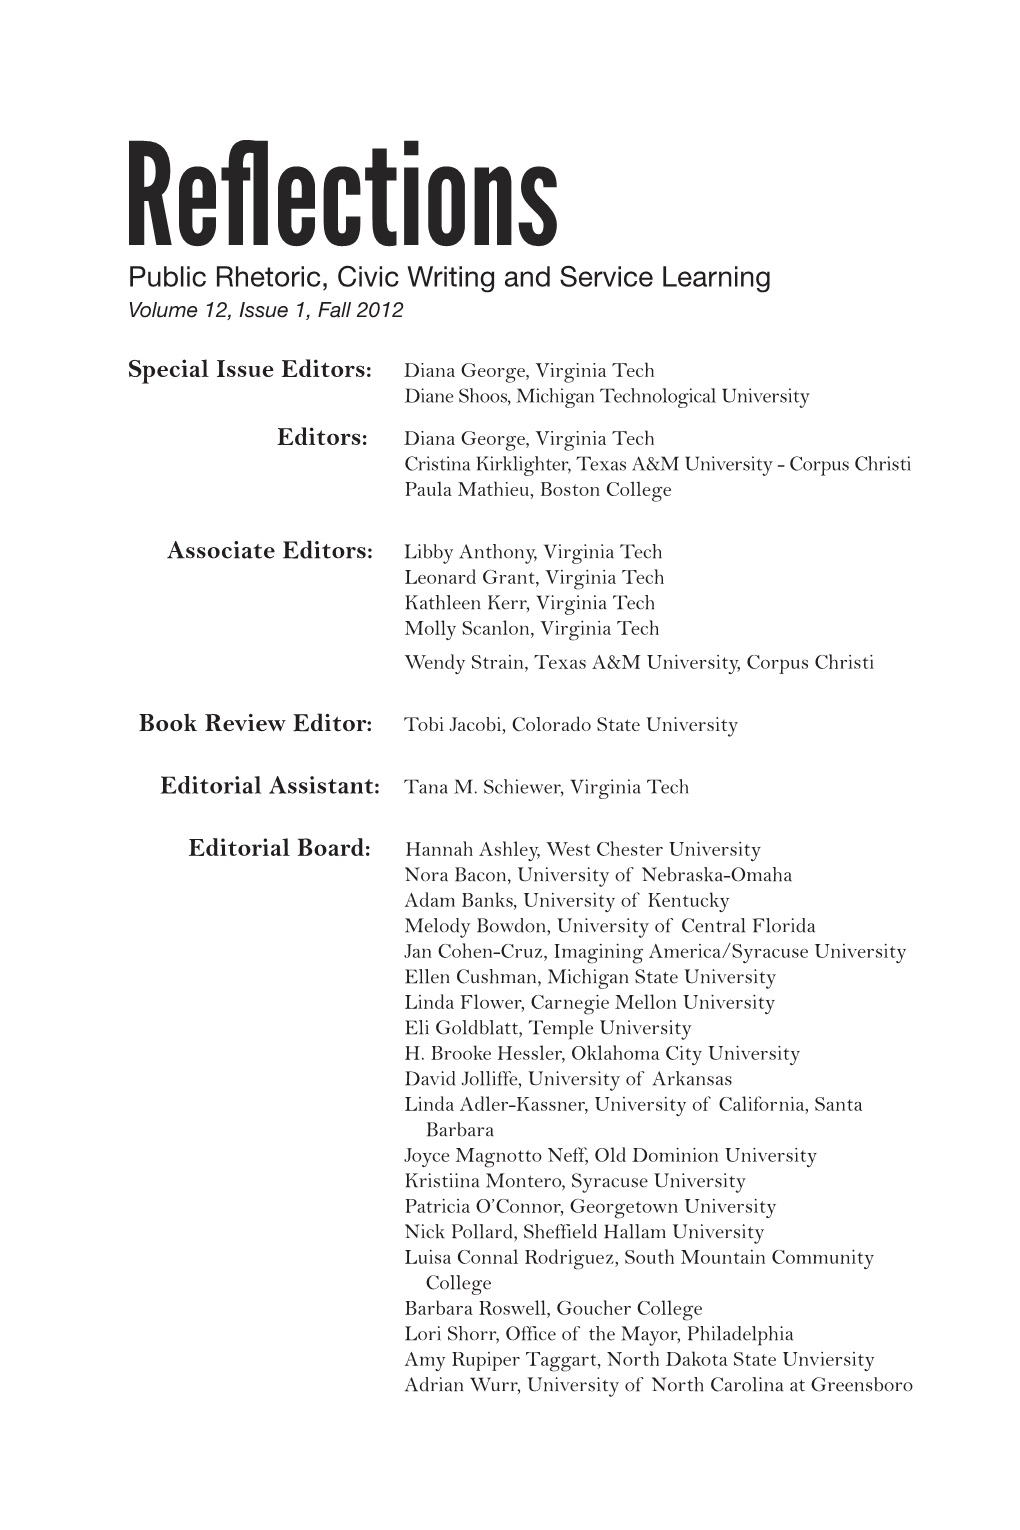 Reflections Public Rhetoric, Civic Writing and Service Learning Volume 12, Issue 1, Fall 2012